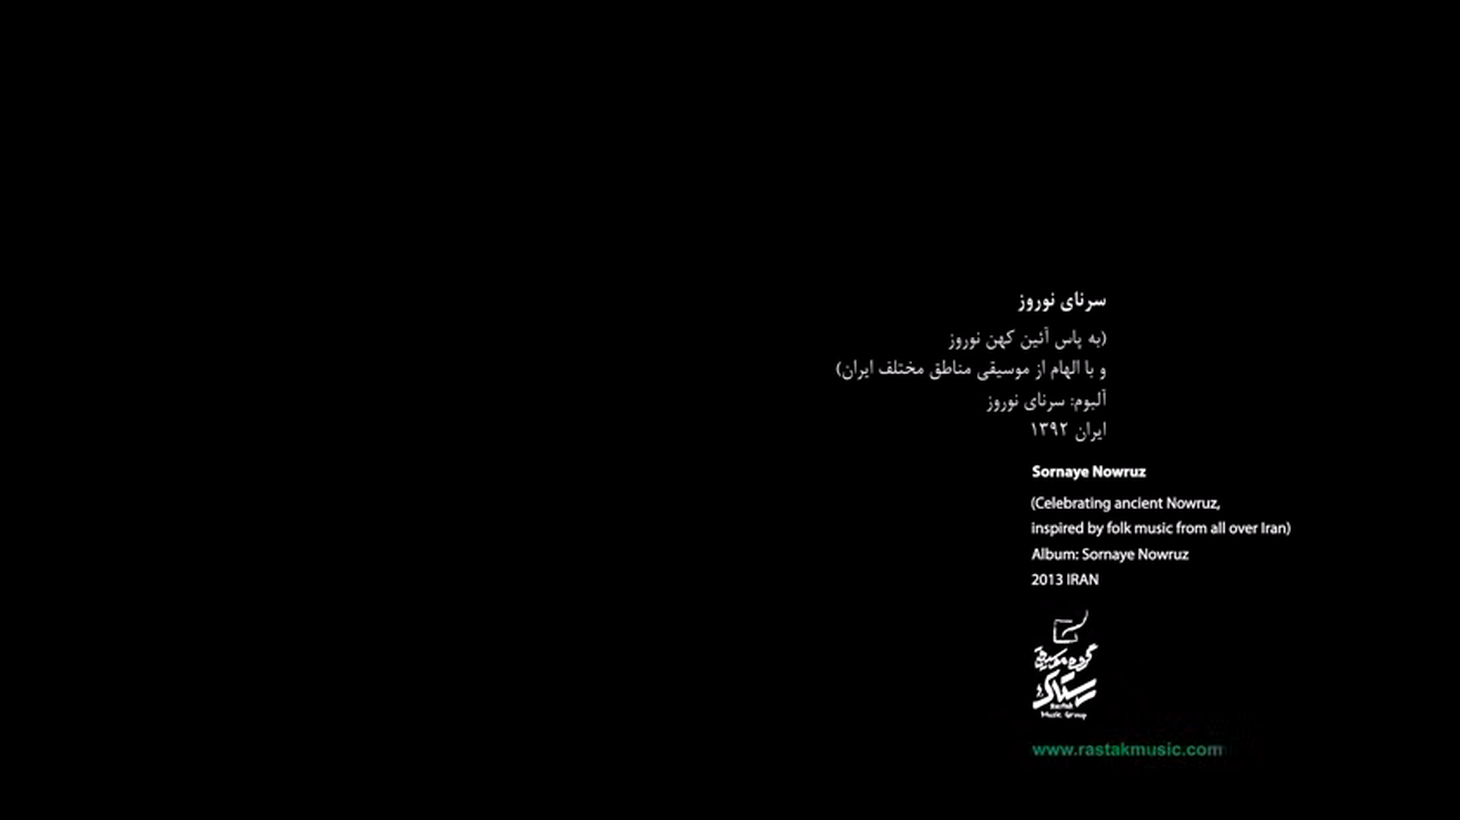 “Sornaye Nowruz” is an old, traditional song. Nassir Nassirzadeh recommends this new recording by the contemporary folk ensemble called Rastak.